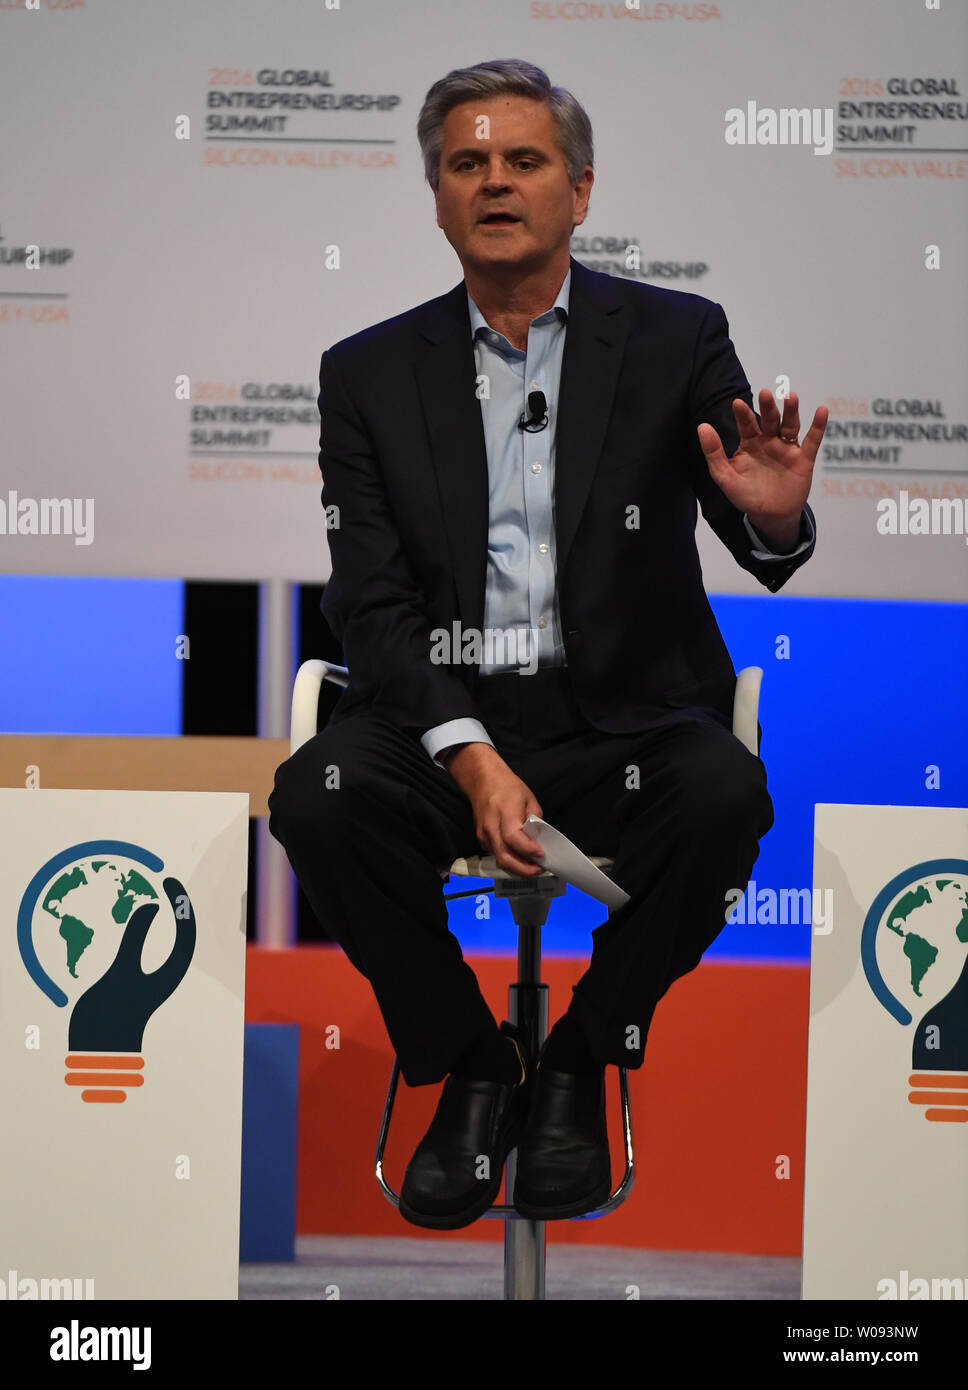 AOL co-founder Steve Case speaks at the Global Entrepreneurship Summit 2016 at Stanford University in Palo Alto, California on June 24,  2016. GES aims to connect American entrepreneurs and investors with international counterparts.          Photo by Terry Schmitt/UPI Stock Photo